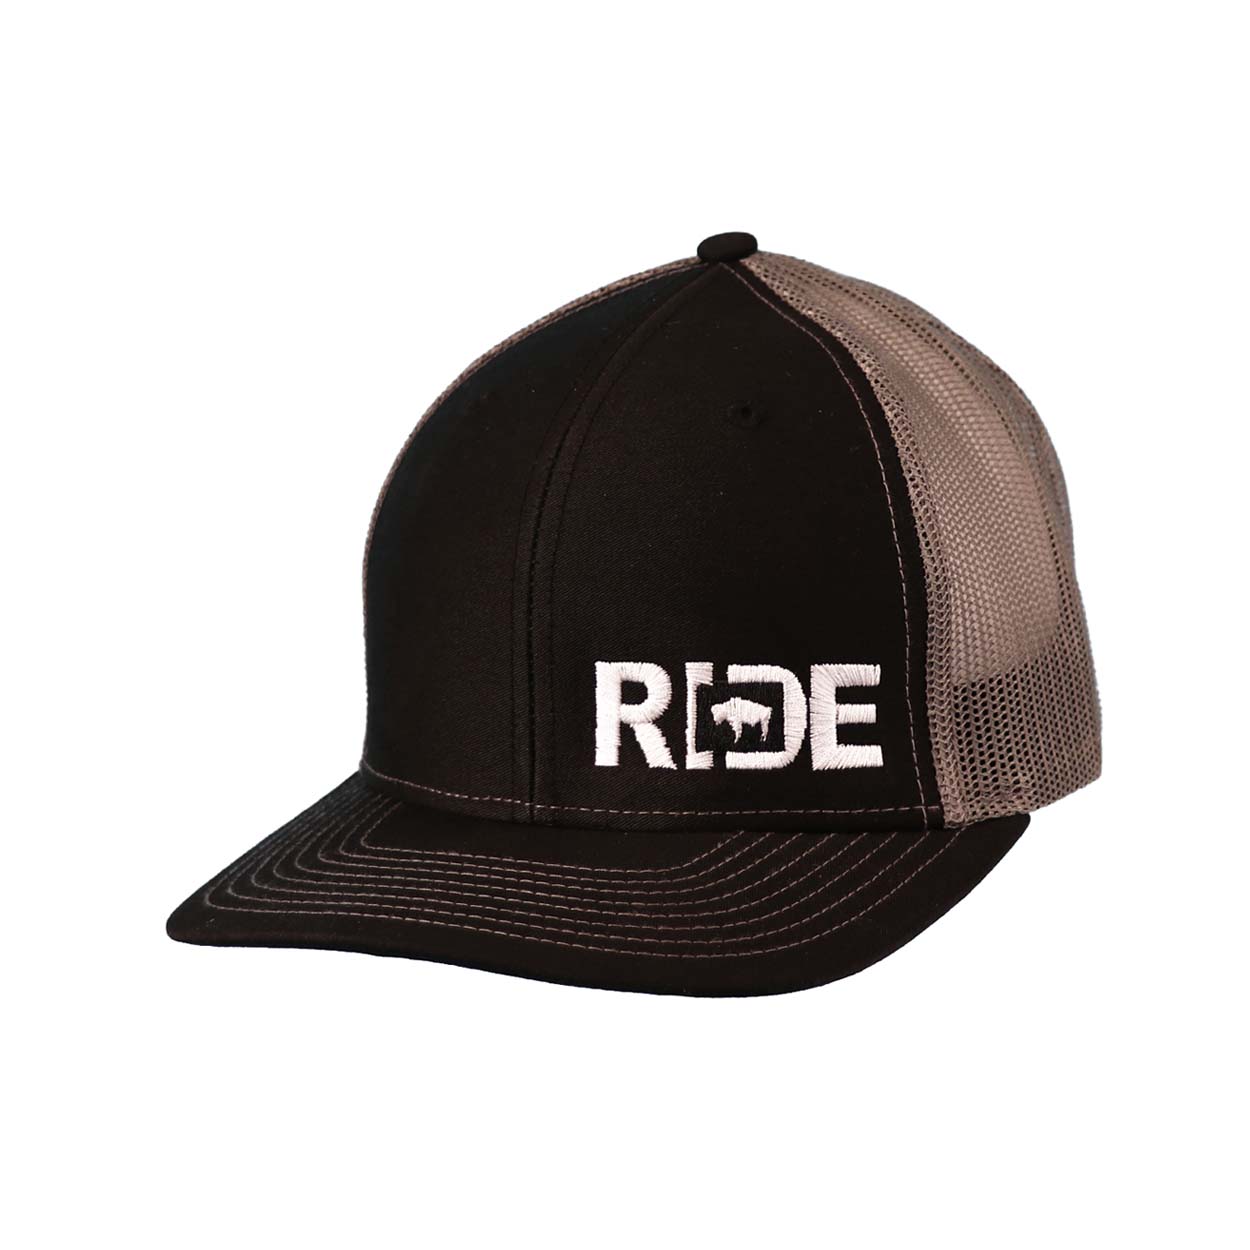 Ride Wyoming Night Out Embroidered Snapback Trucker Hat Black/Gray